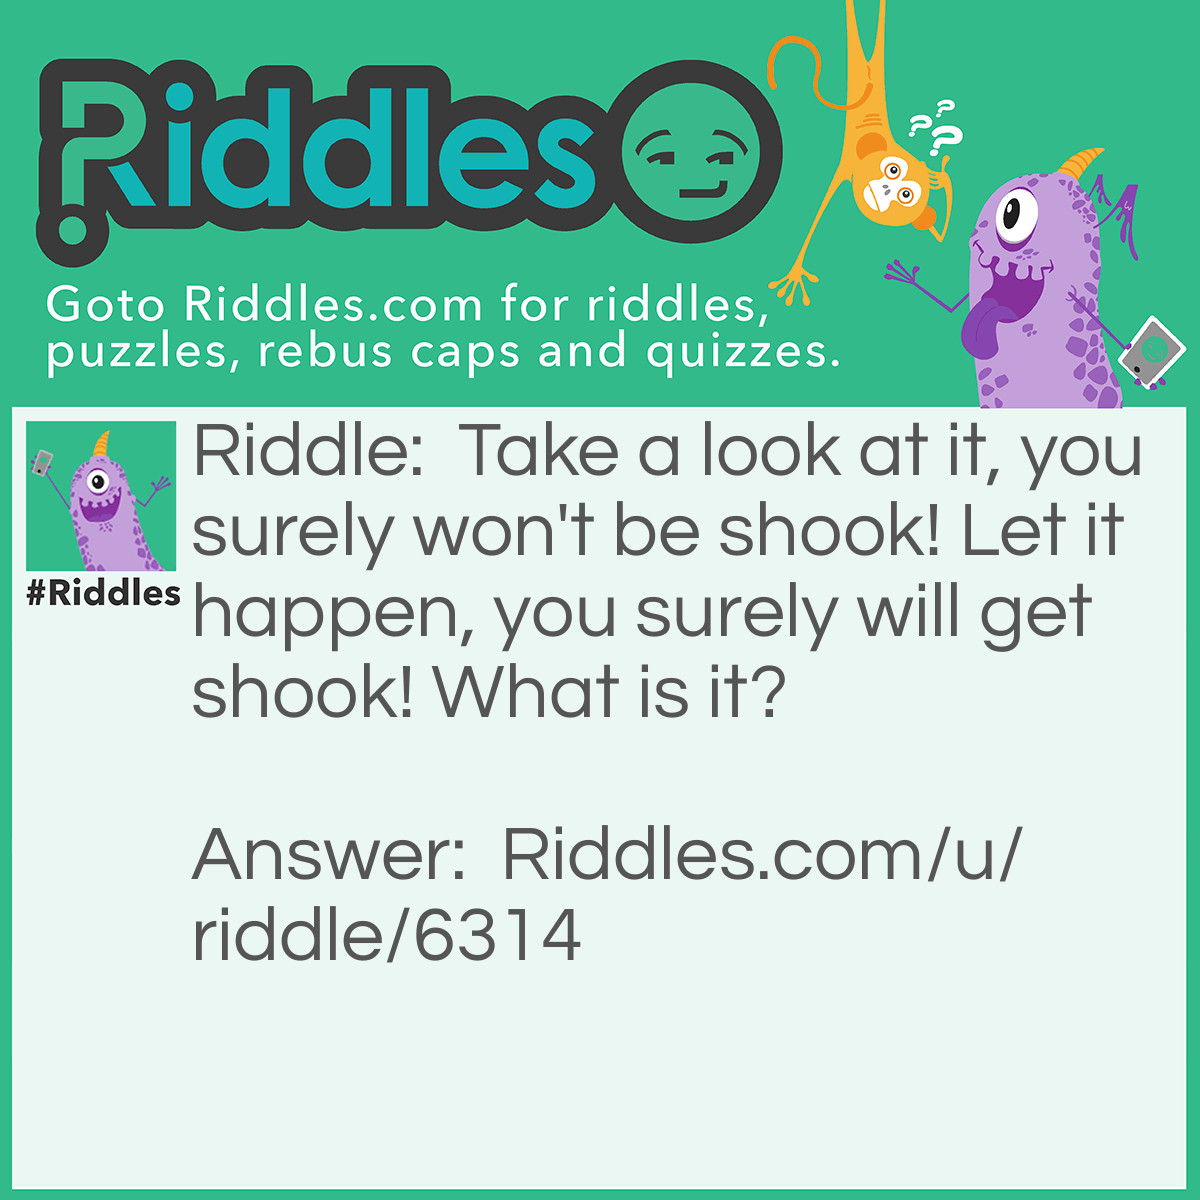 Riddle: Take a look at it, you surely won't be shook! Let it happen, you surely will get shook! What is it? Answer: A Surprise.